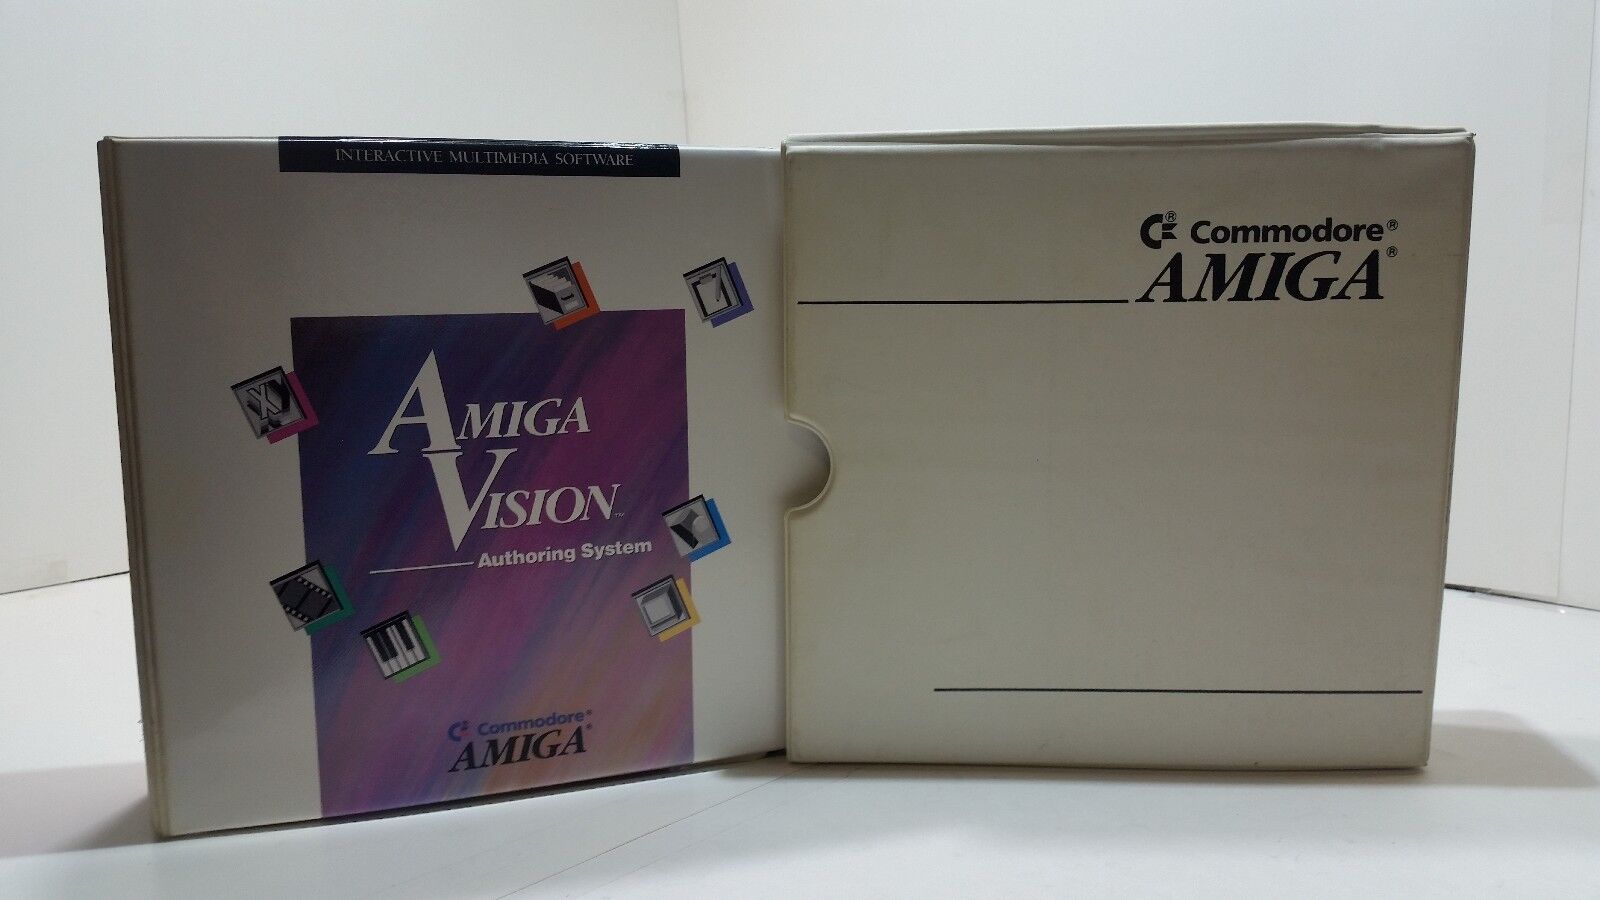 Commodore Amiga Vision Authoring System Complete with Software and Binder Case